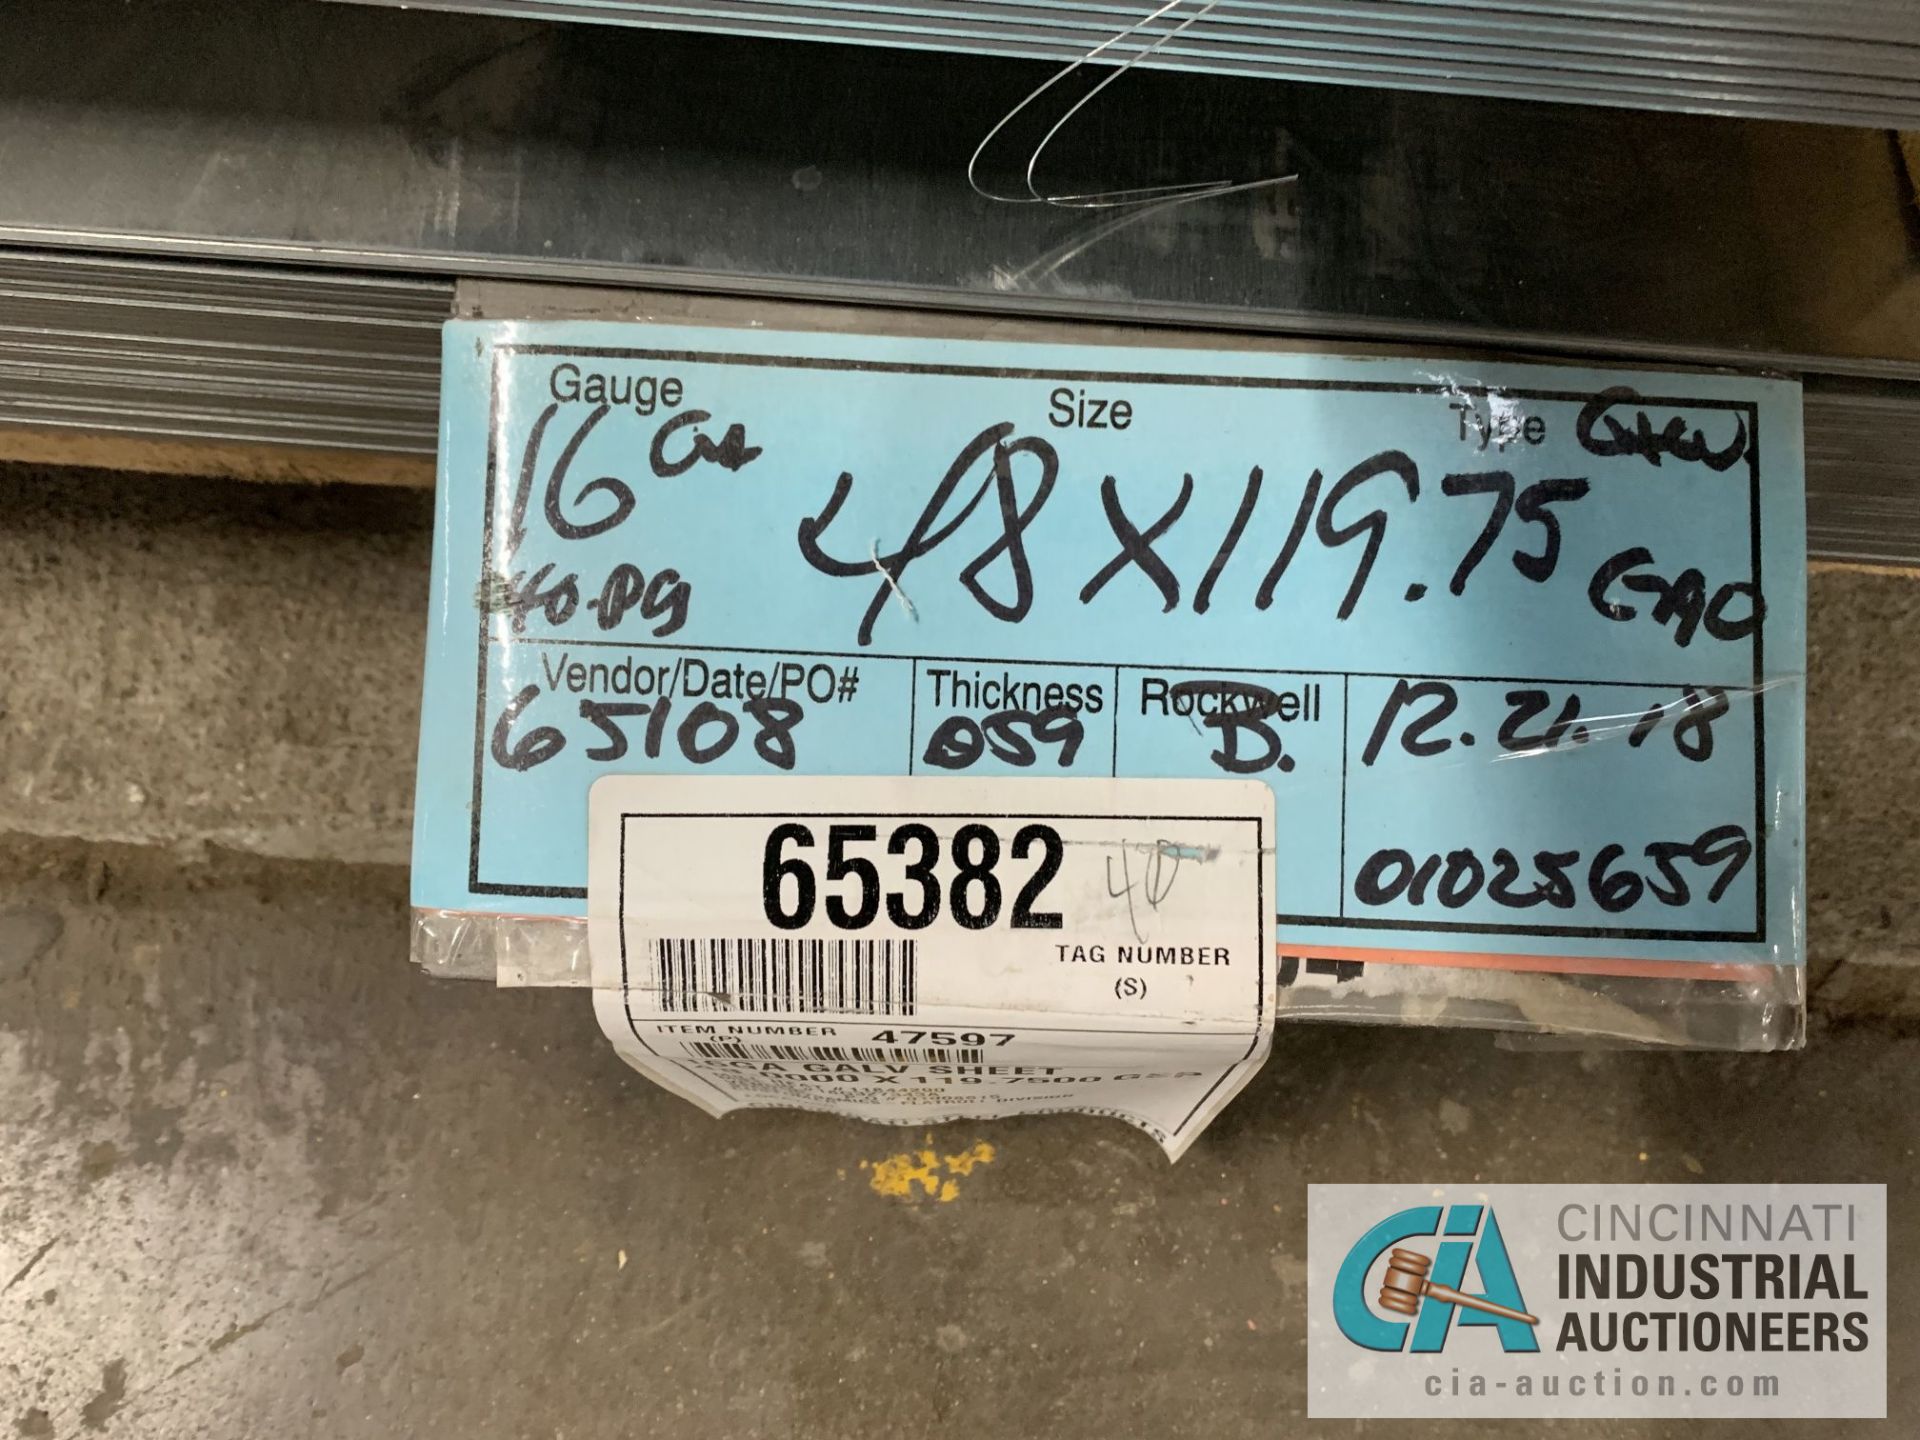 (LOT) APPROX. 8,817 LBS. COATED SHEET STEEL, 1-STACK, 3-BUNDLES, SEE INVENTORY FOR LISTING. - Image 4 of 4